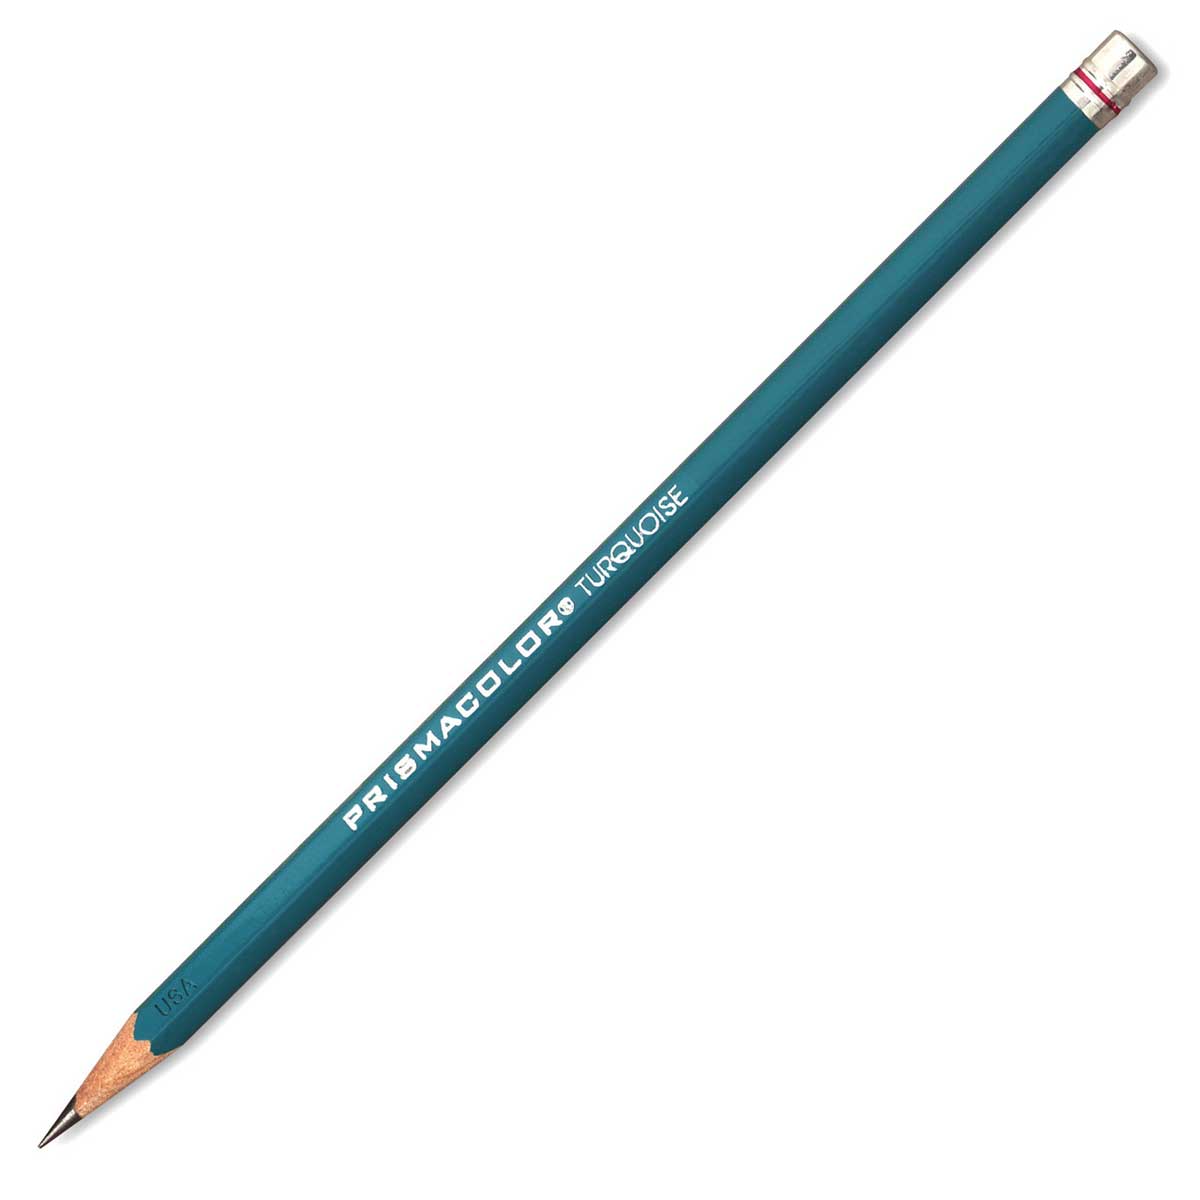 Prismacolor Turquoise Drawing Pencil - HB